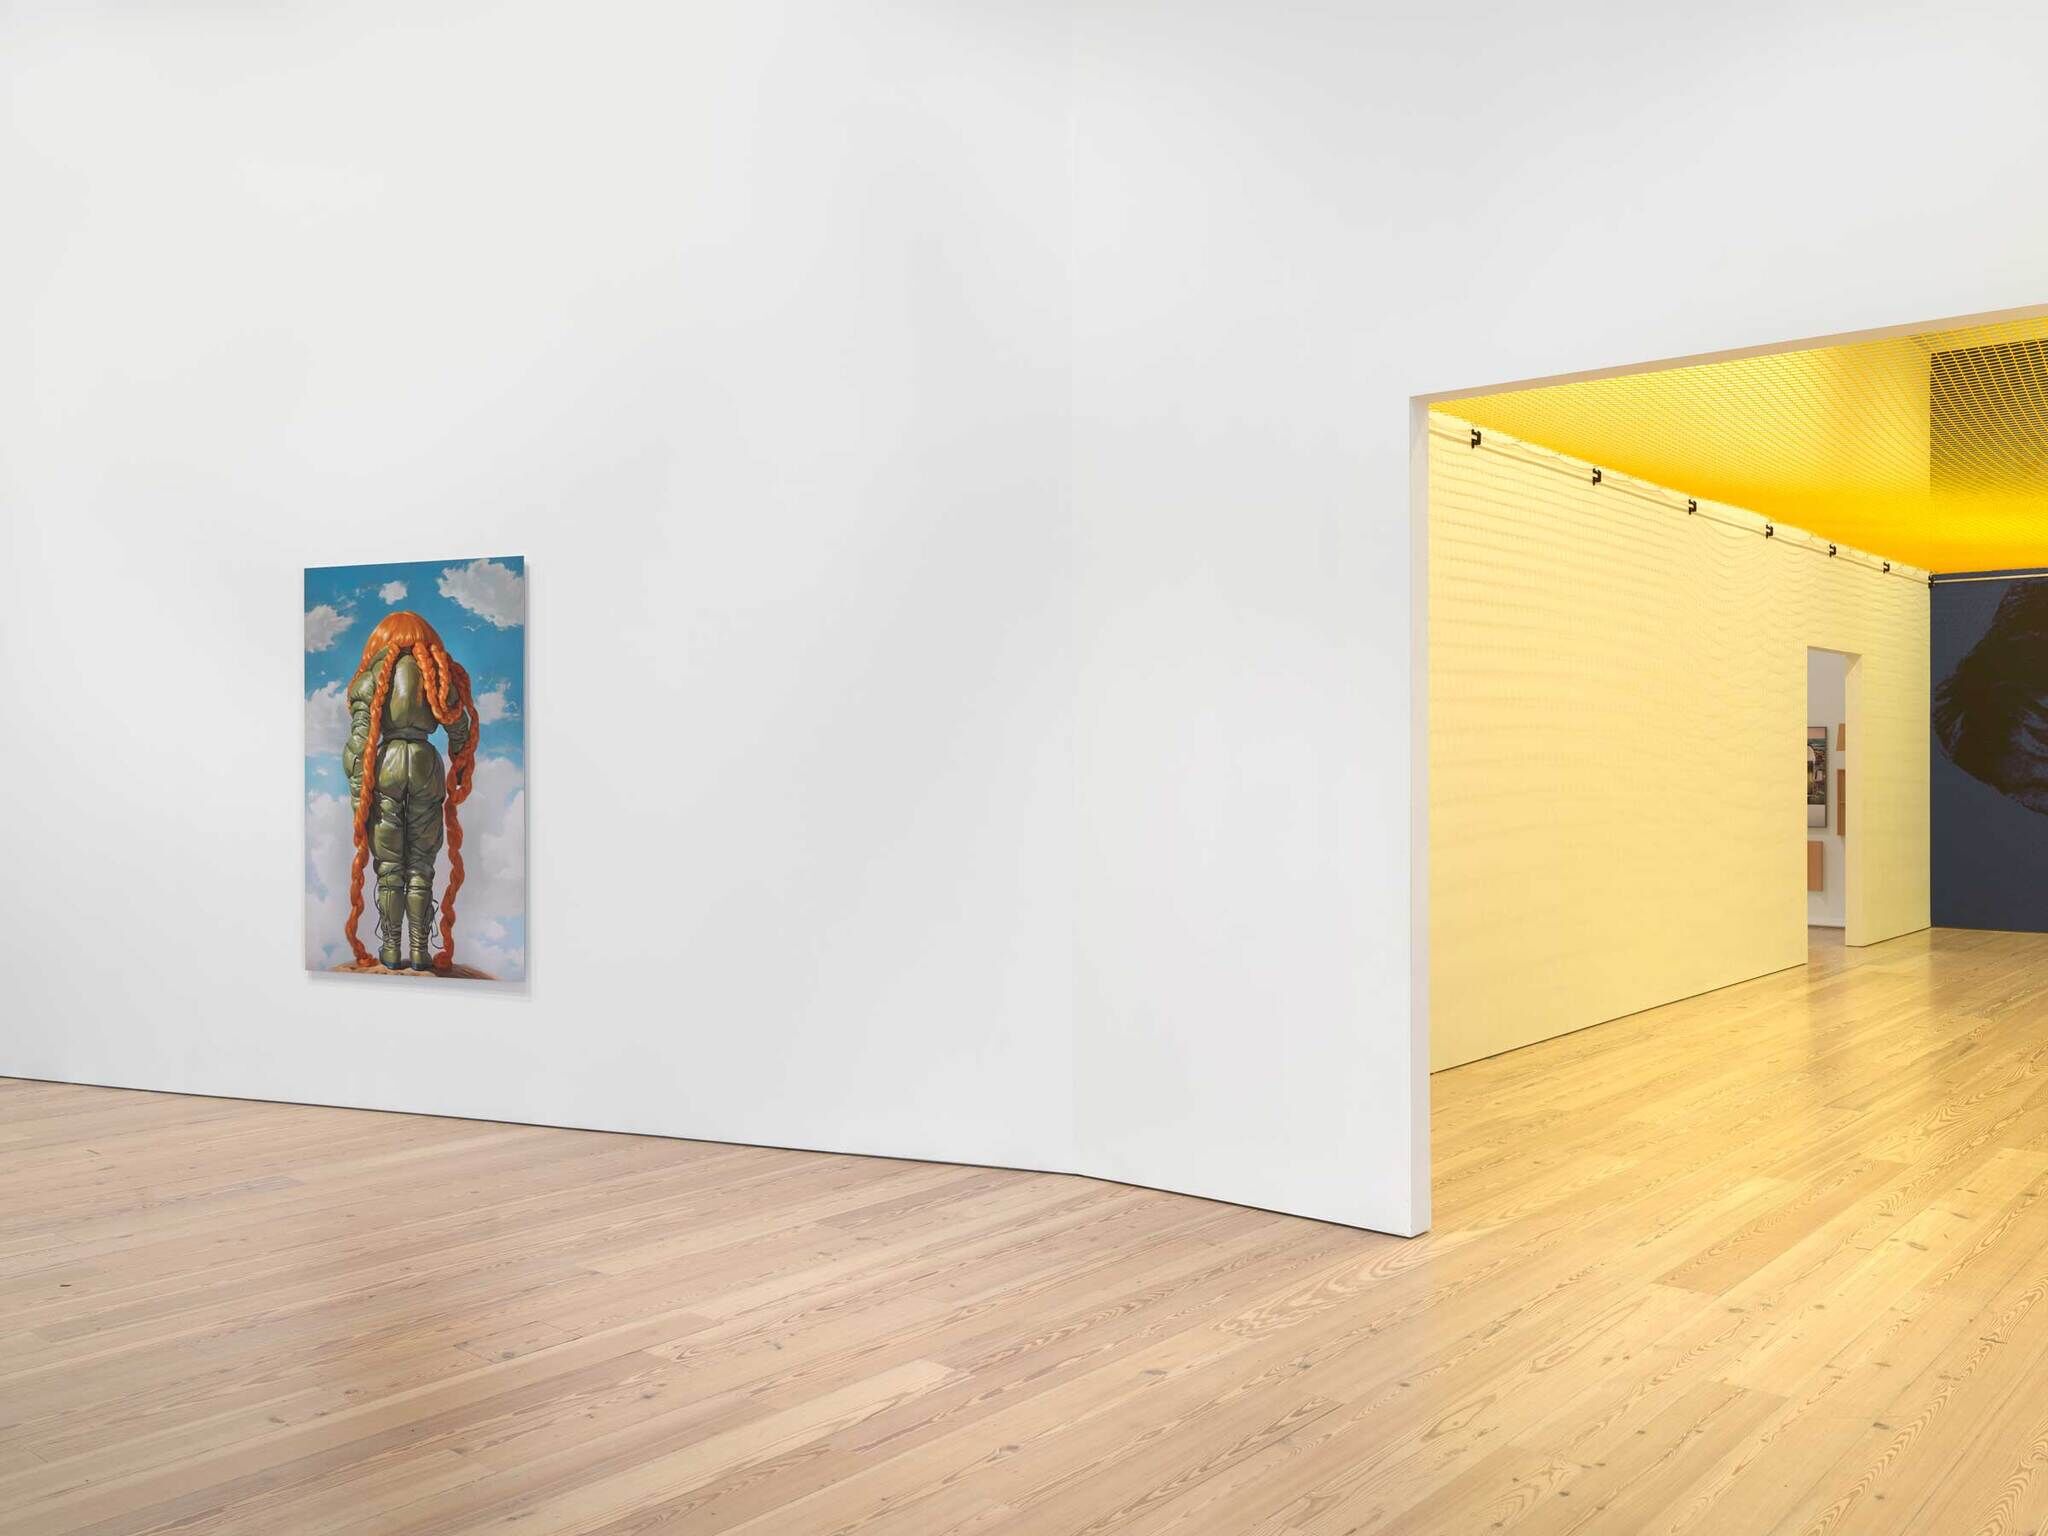 Modern art gallery interior with a single painting on a white wall, wooden floor, and a yellow ceiling in the adjacent room.